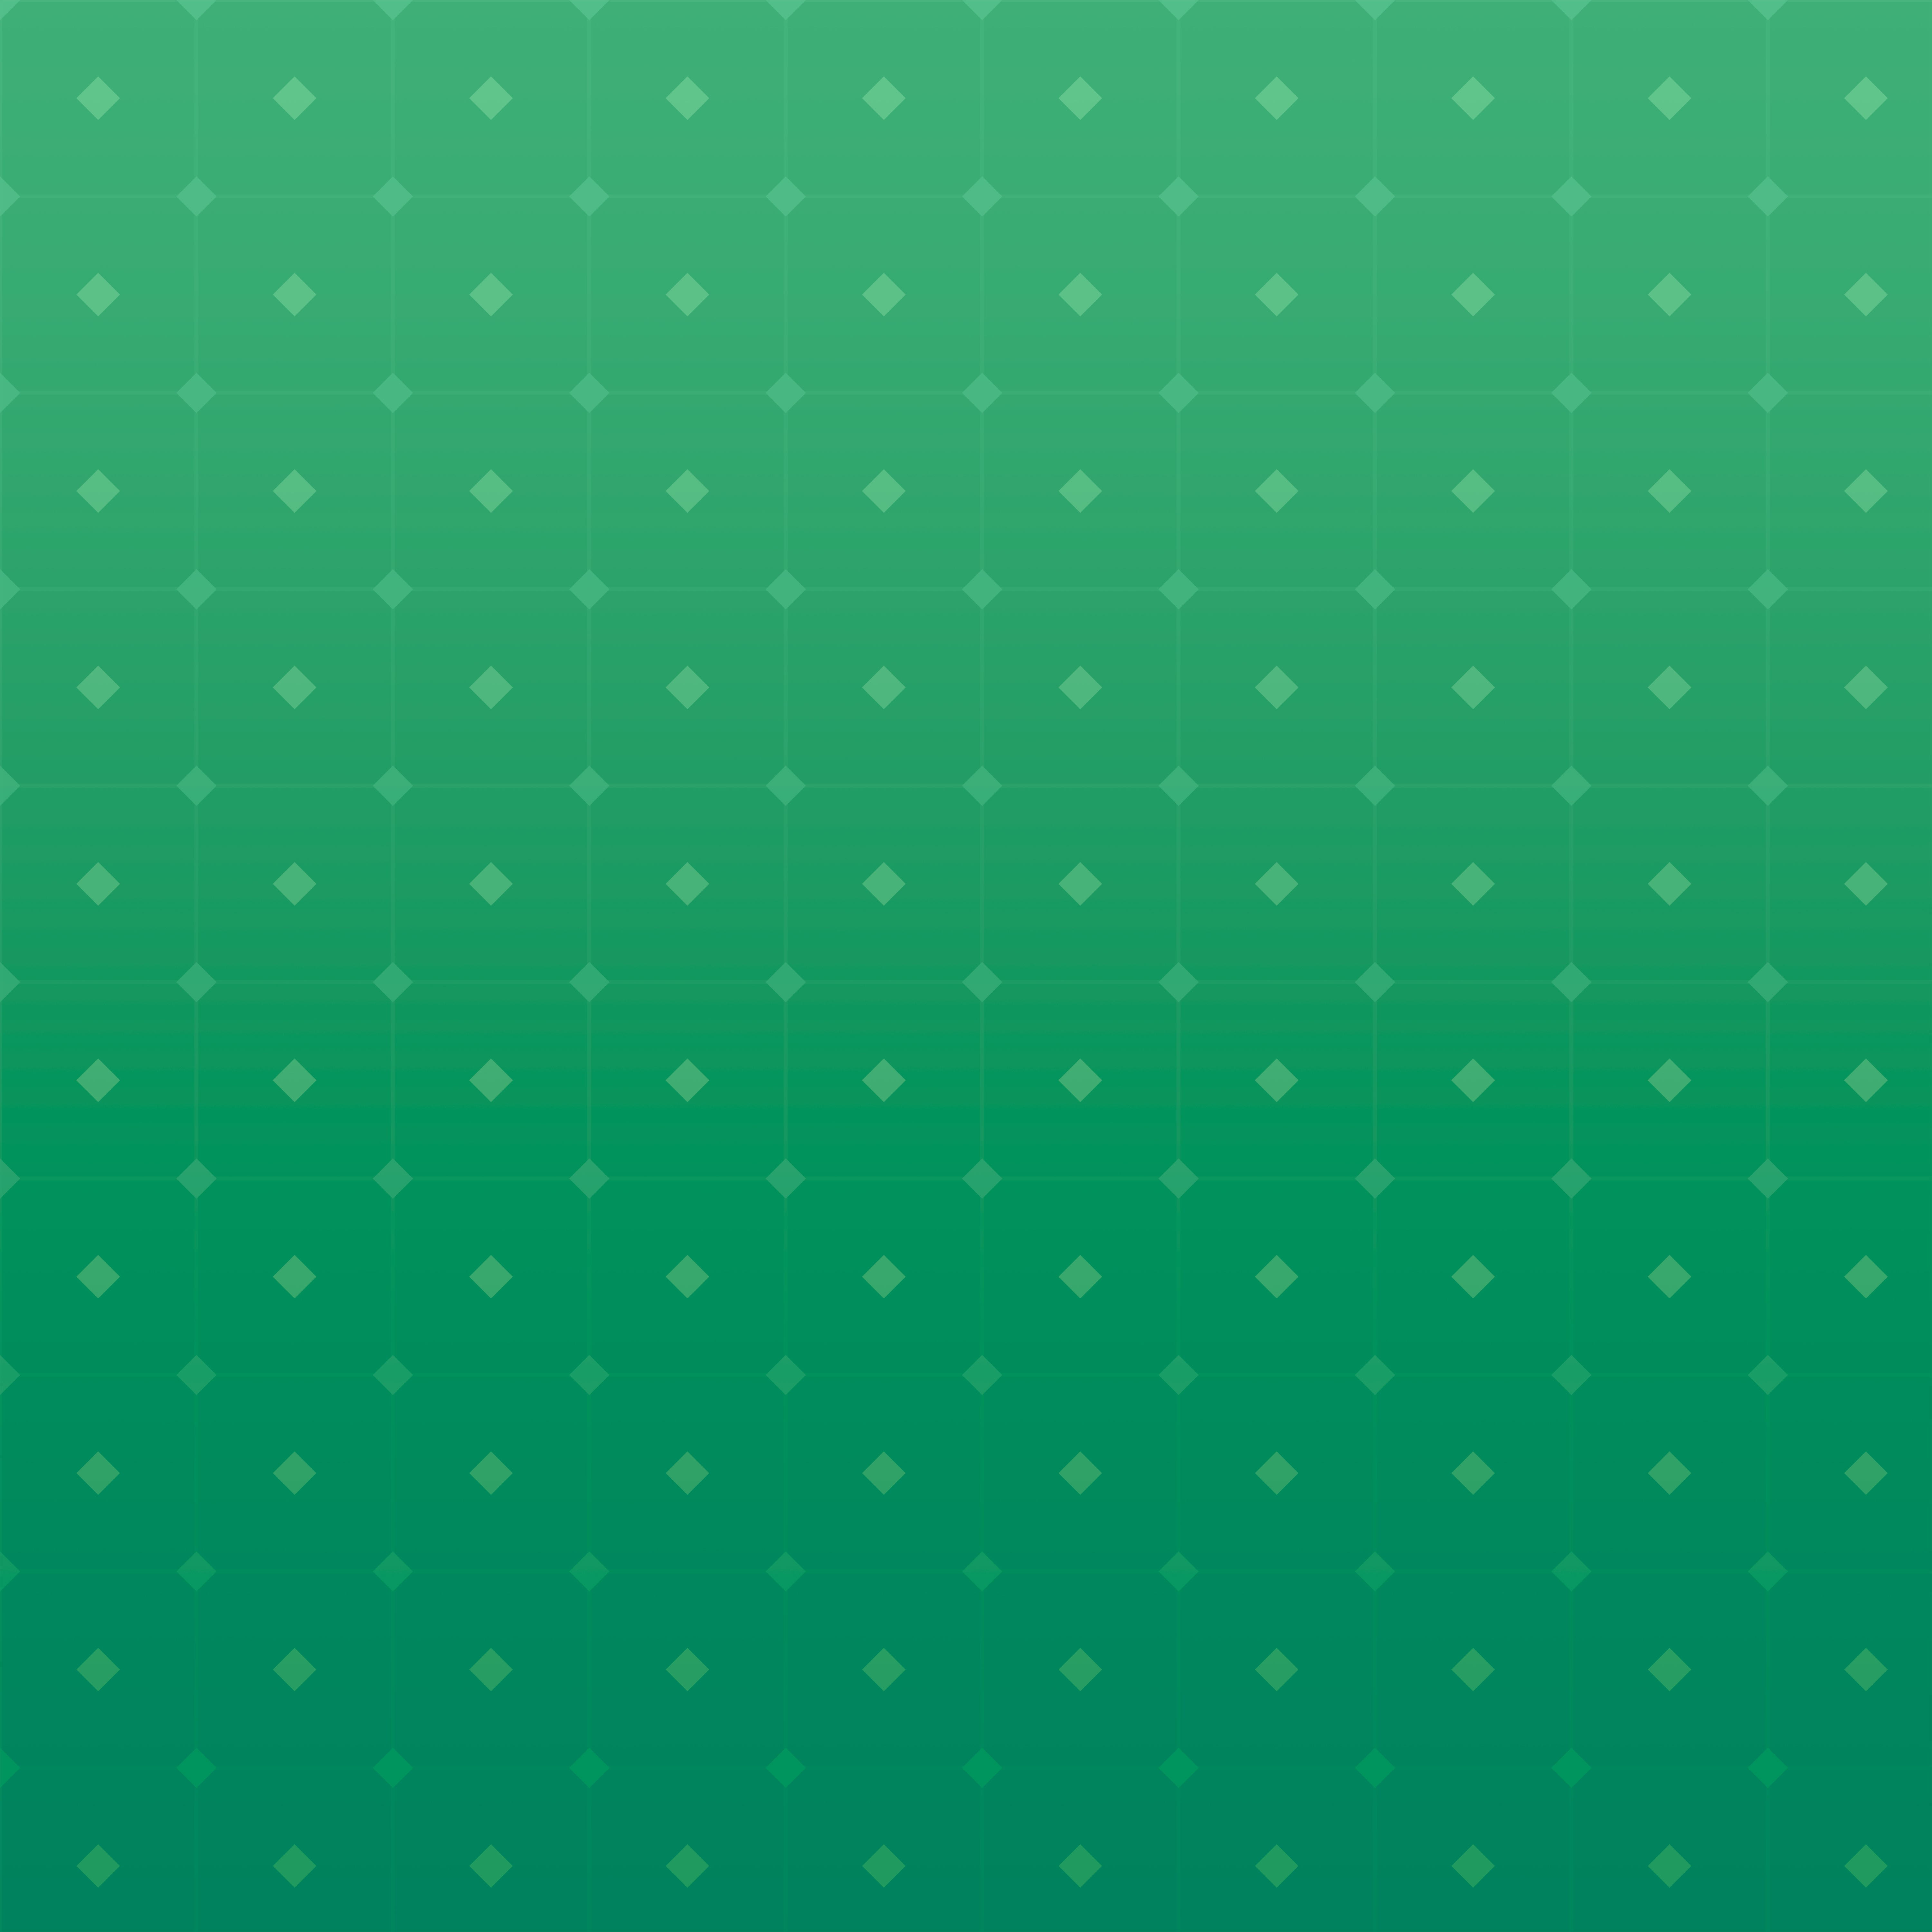 grid, gradient, green, pattern, texture, textures, squares mobile wallpaper